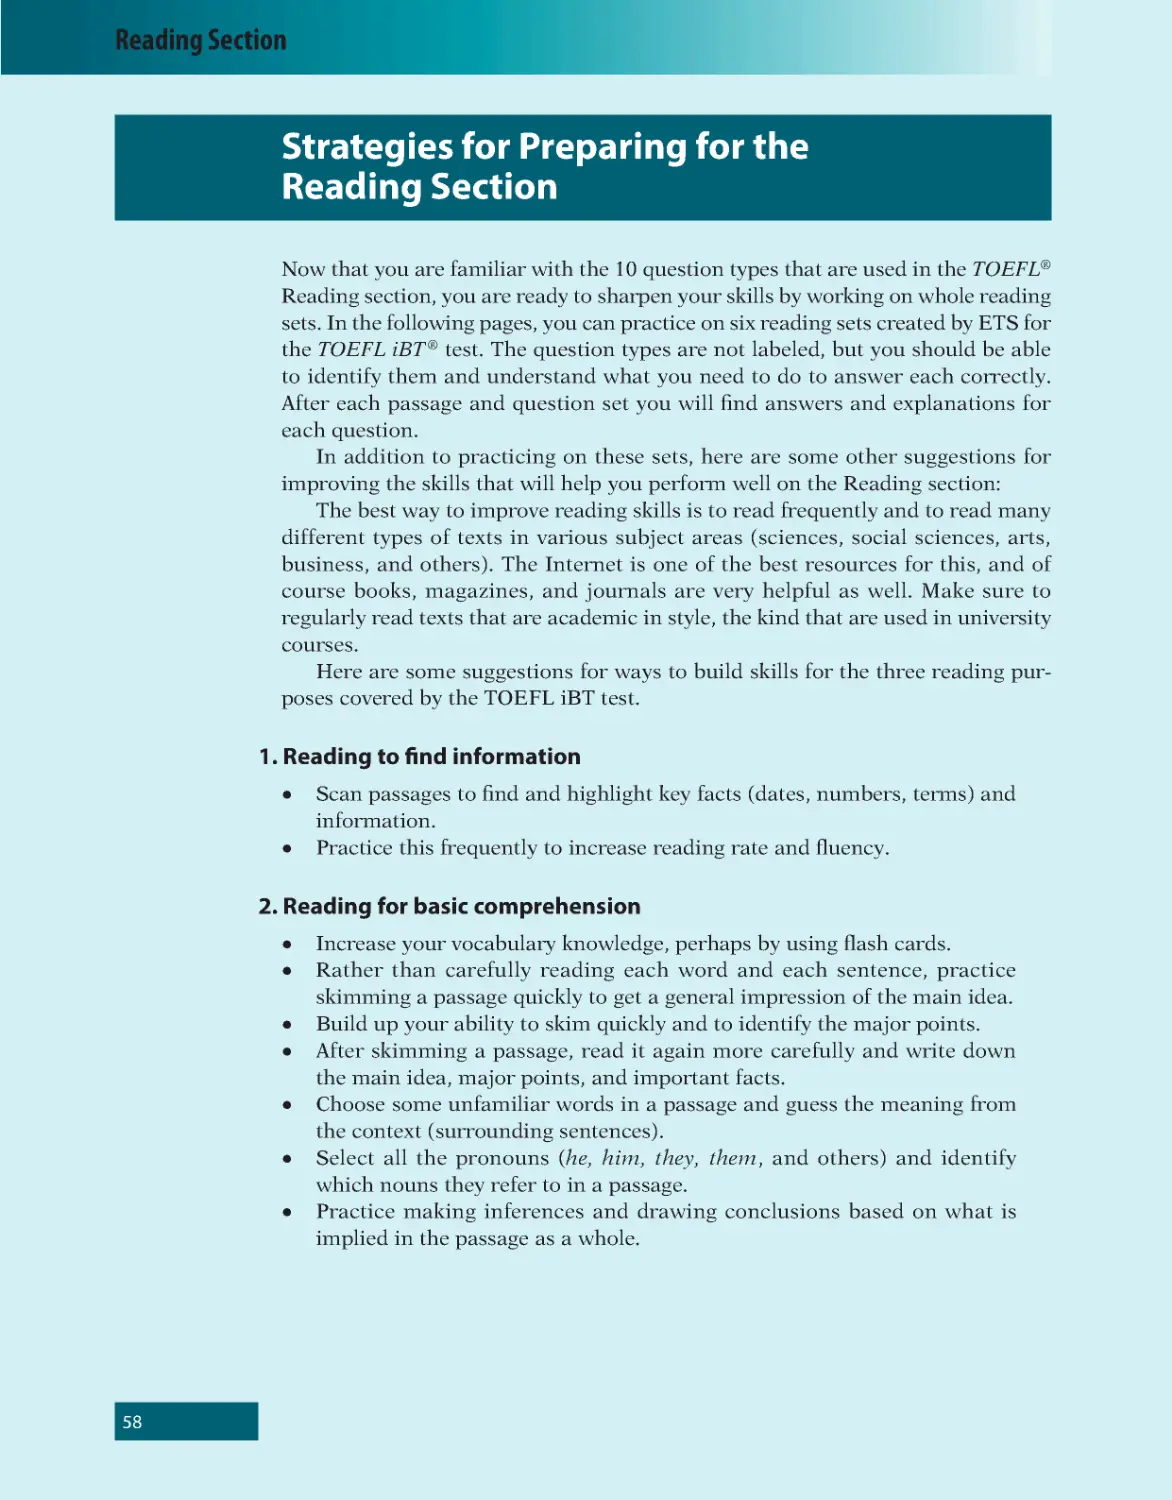 Strategies for Preparing for the Reading Section